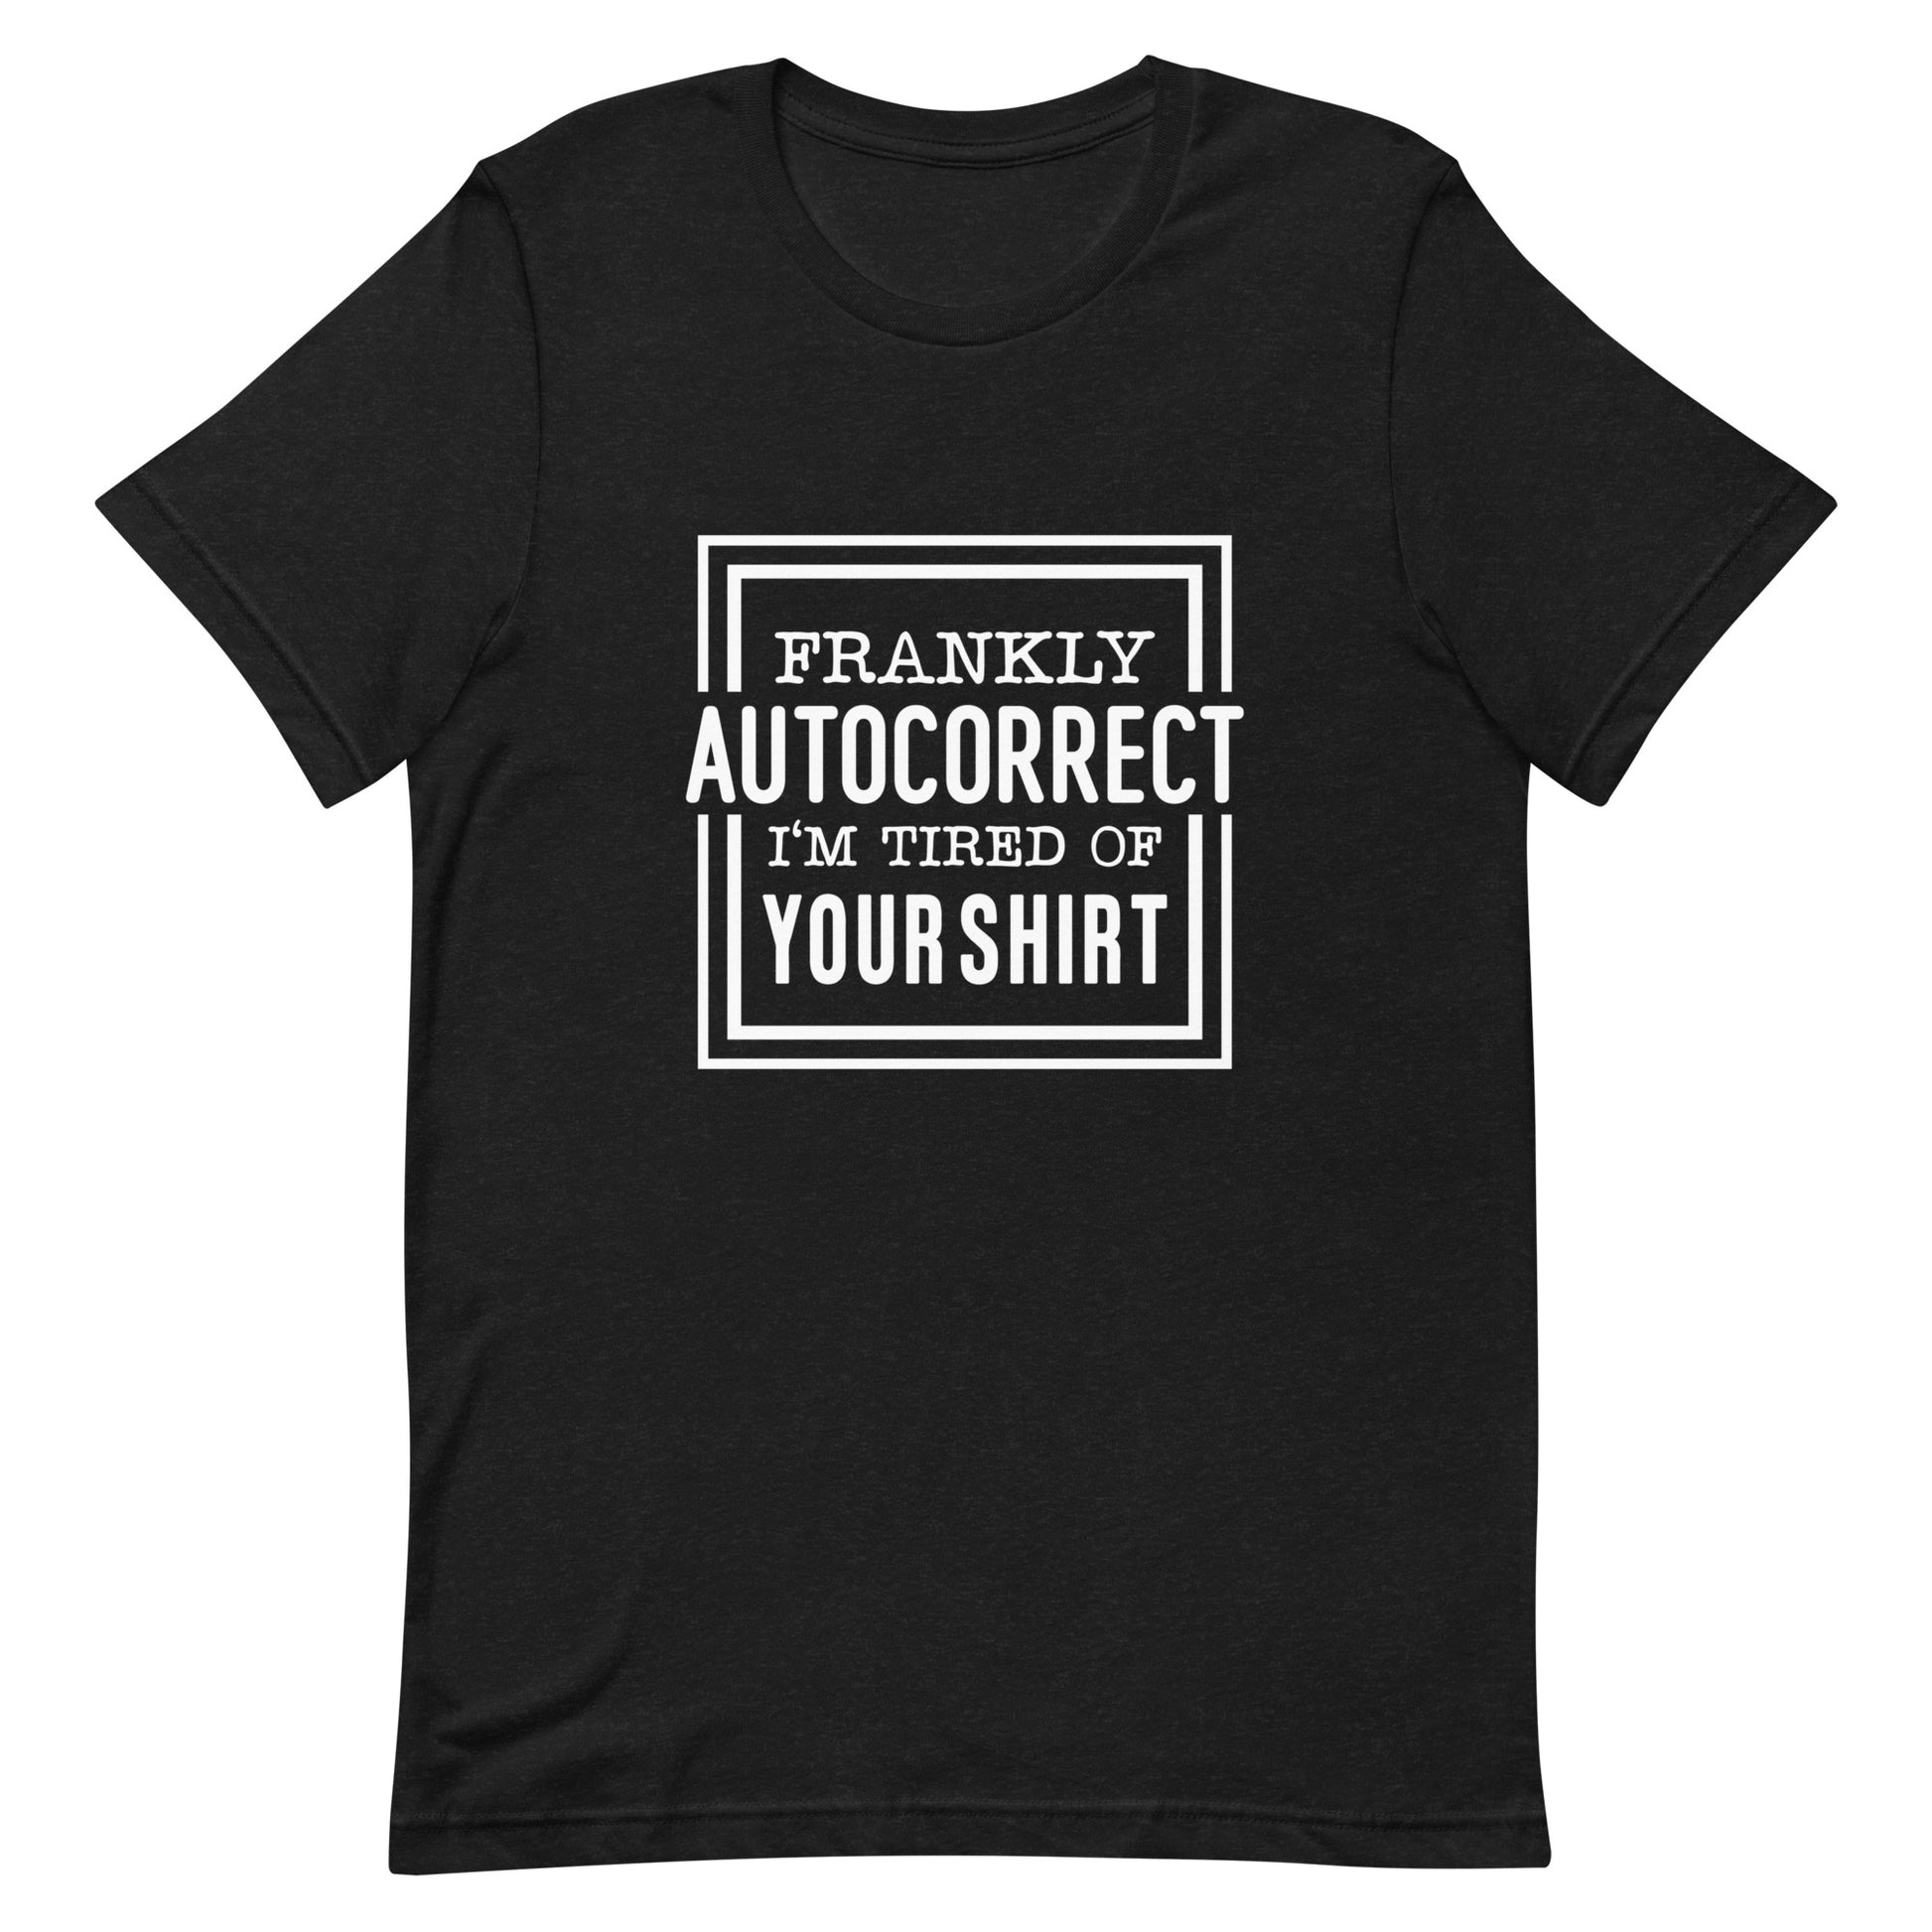 Frankly Autocorrect I'm of Tired of Your Shirt Unisex T-shirt